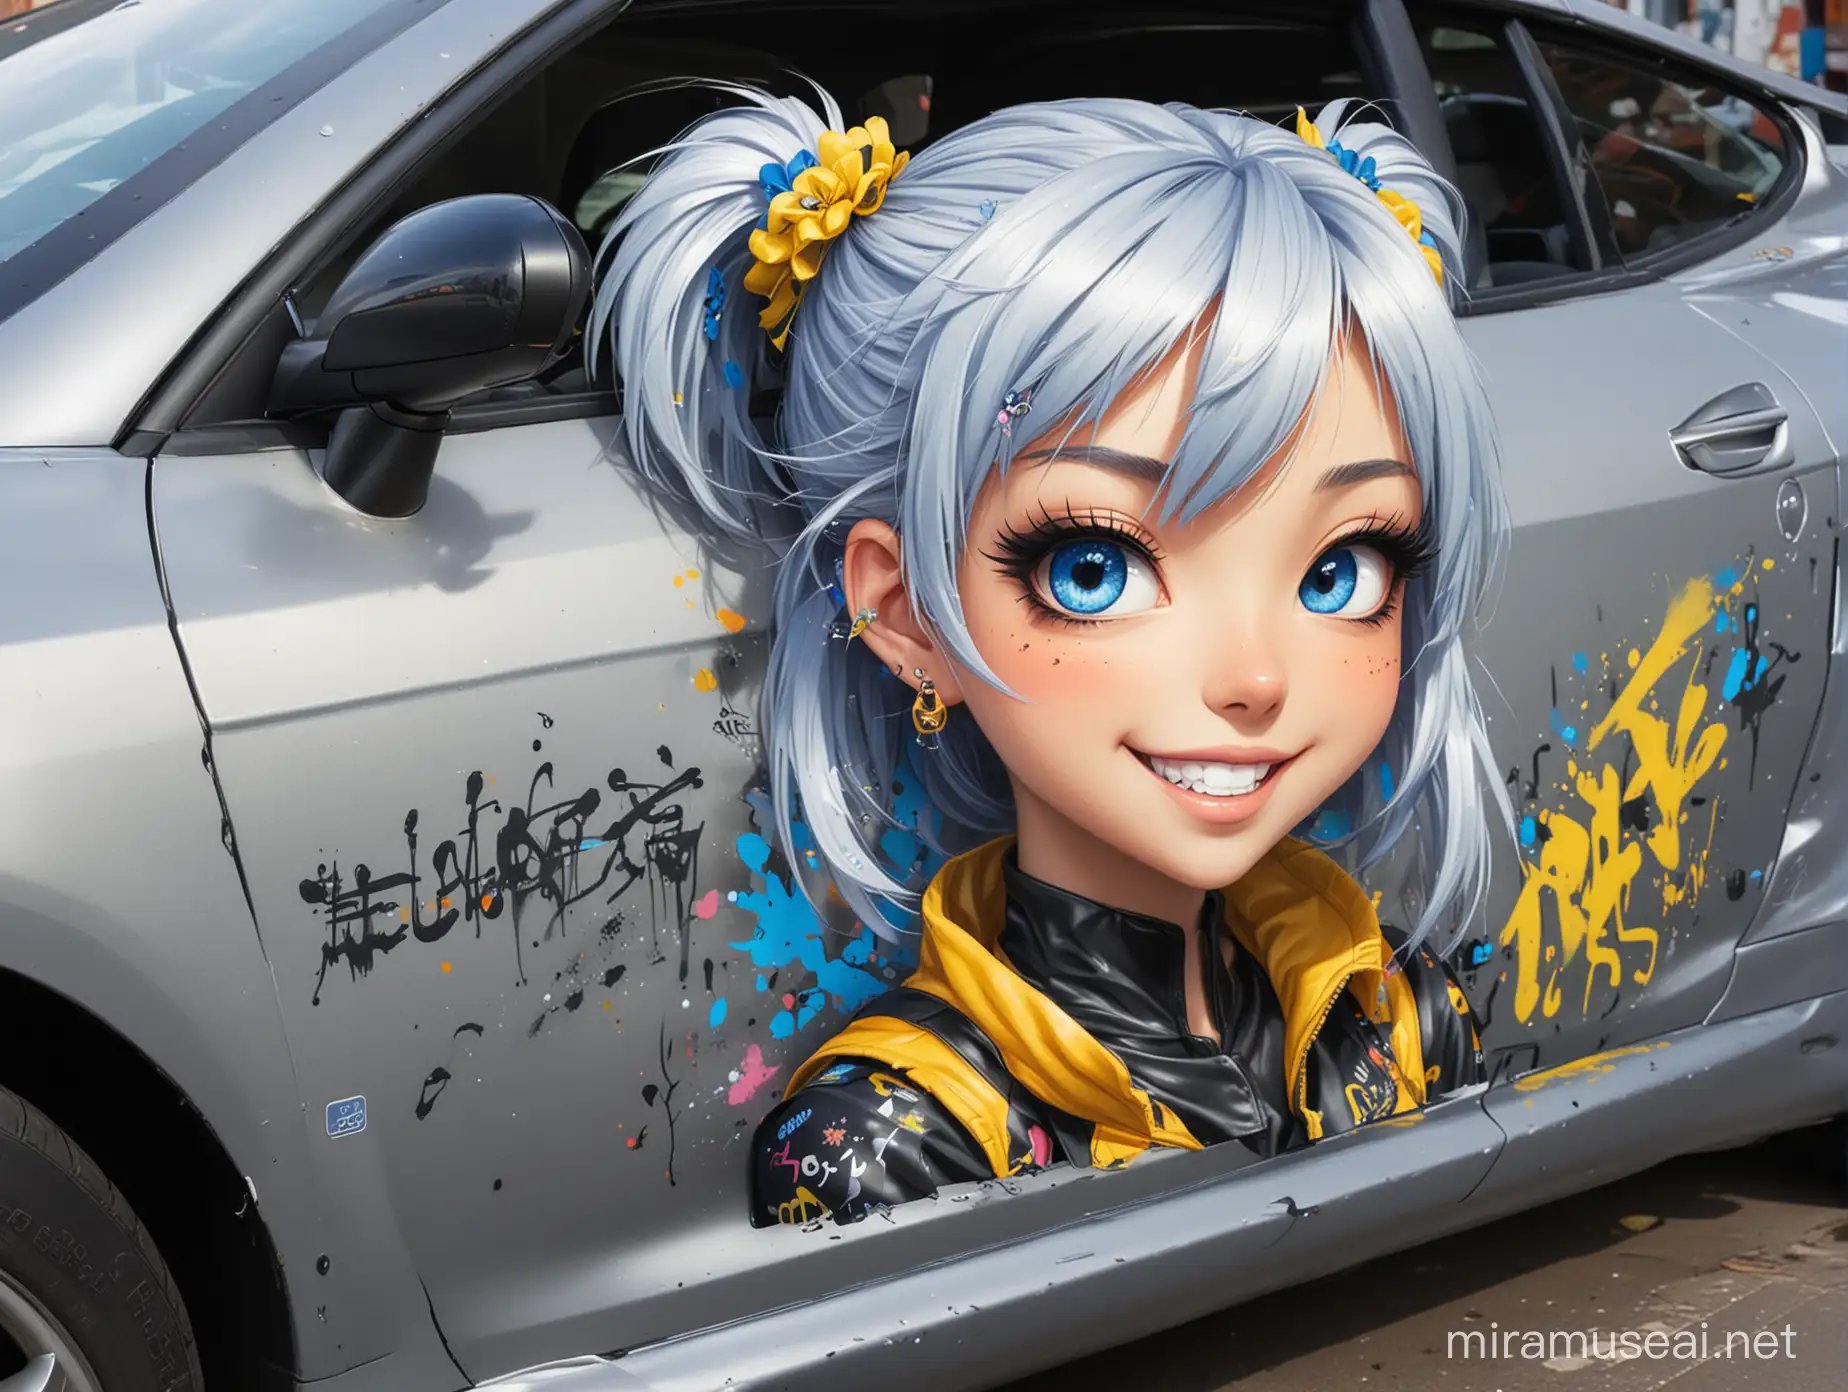 Colorful Anime Girl Airbrushed Design on Sports Car